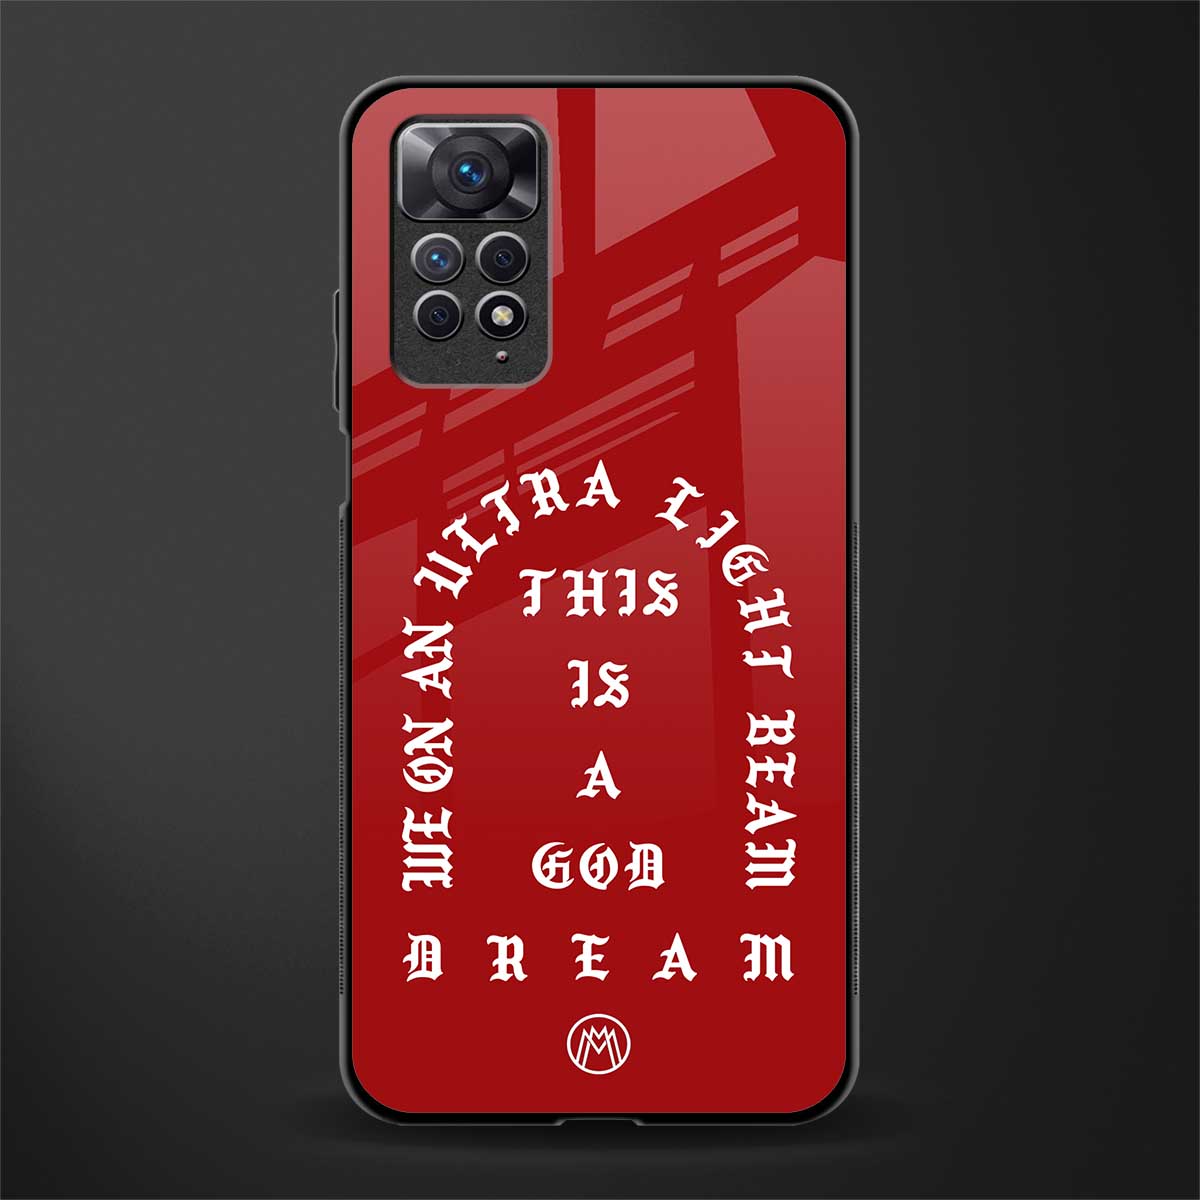 god dream back phone cover | glass case for redmi note 11 pro plus 4g/5g